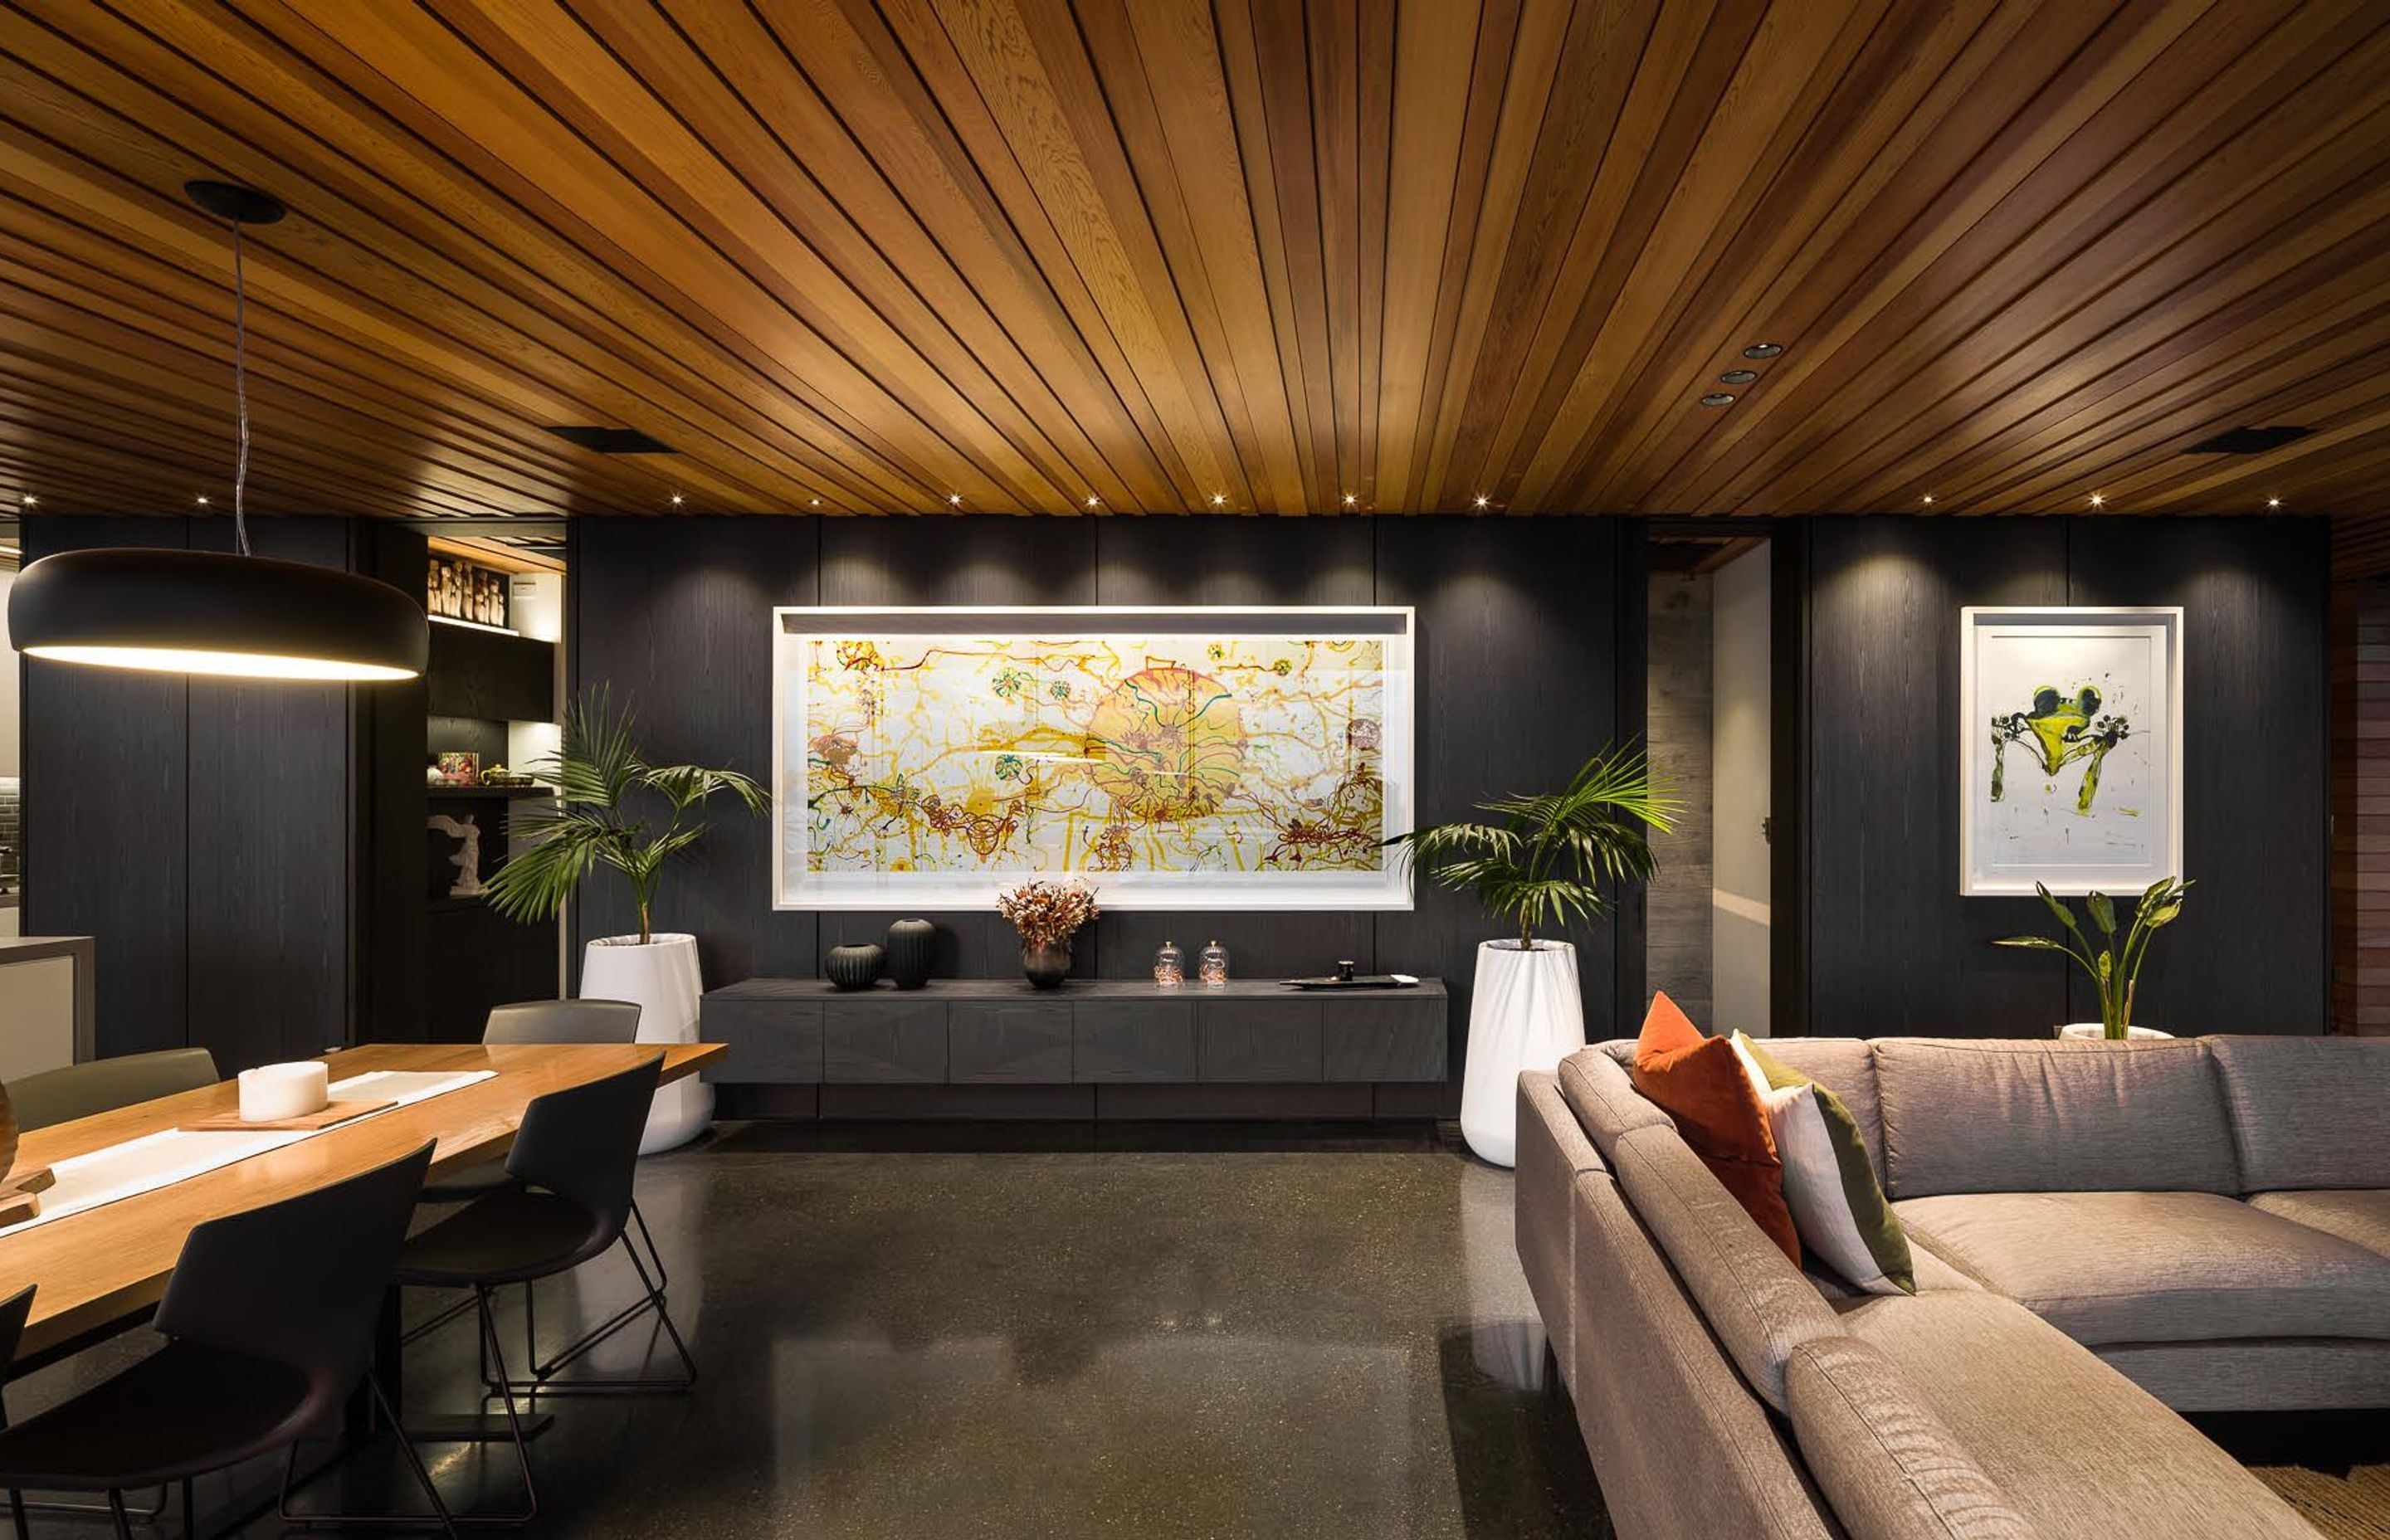 The warm timber ceiling panels juxtapose with the surrounding materials.